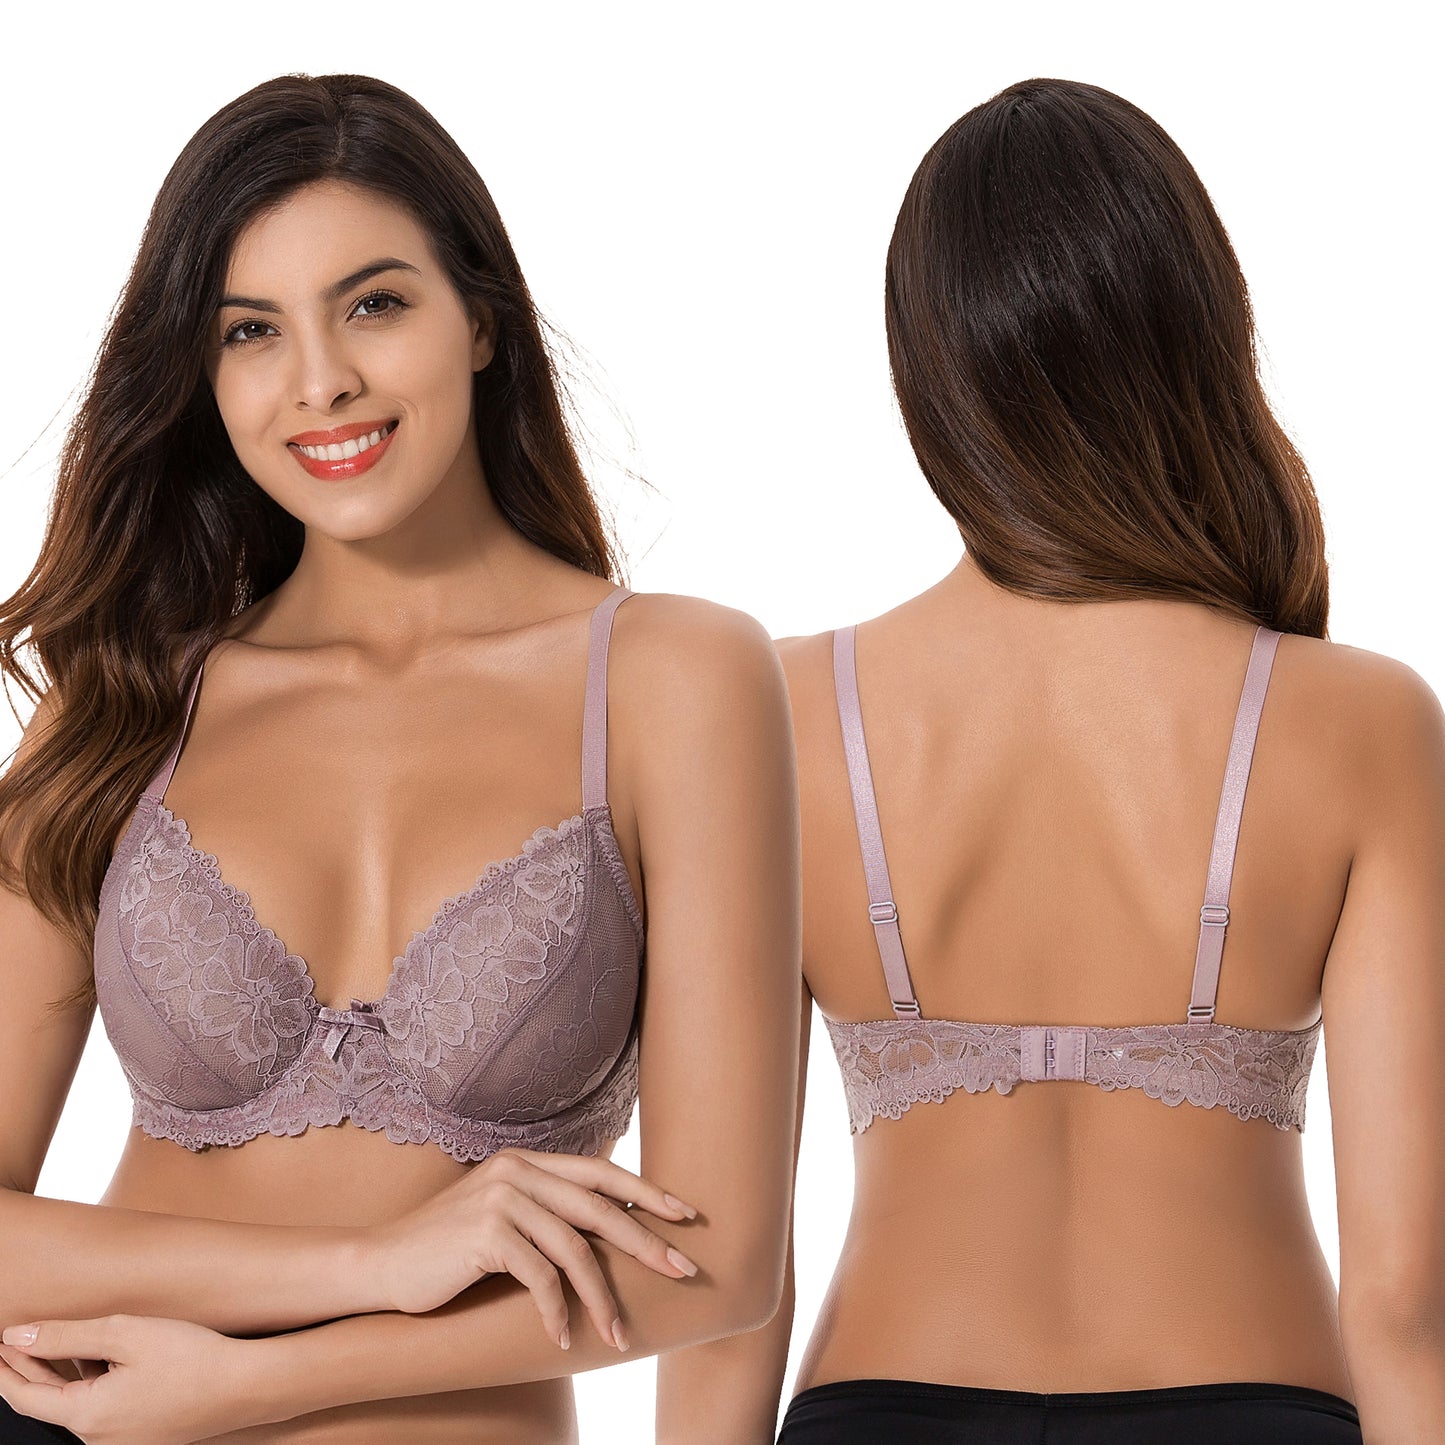 Semi-Sheer Balconette Underwire Lace Bra and Scalloped Hems (3 Pack)